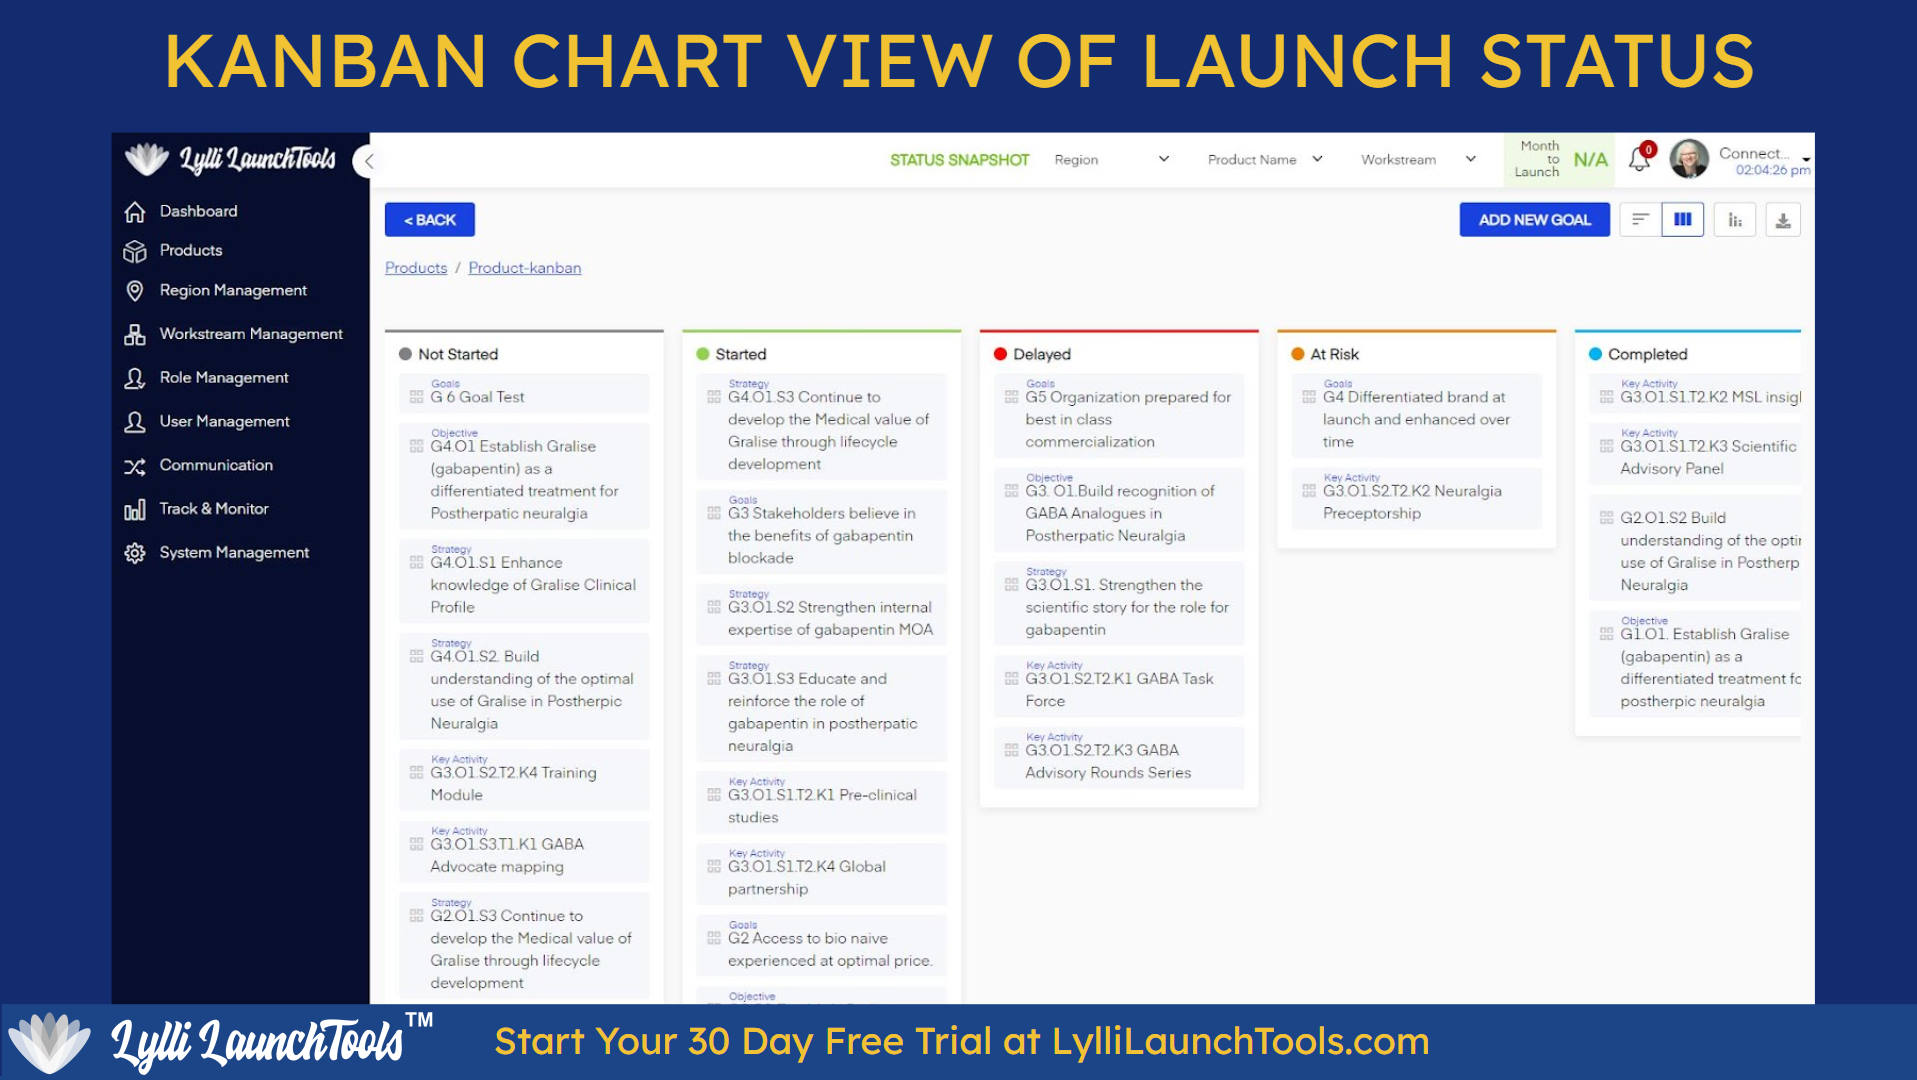 Lylli LaunchTools Kanban charts offer a quick snapshot of the Product Launch Process. Launch Better, Faster & Smoother. Start for free today at LylliLaunchTools.com/signup